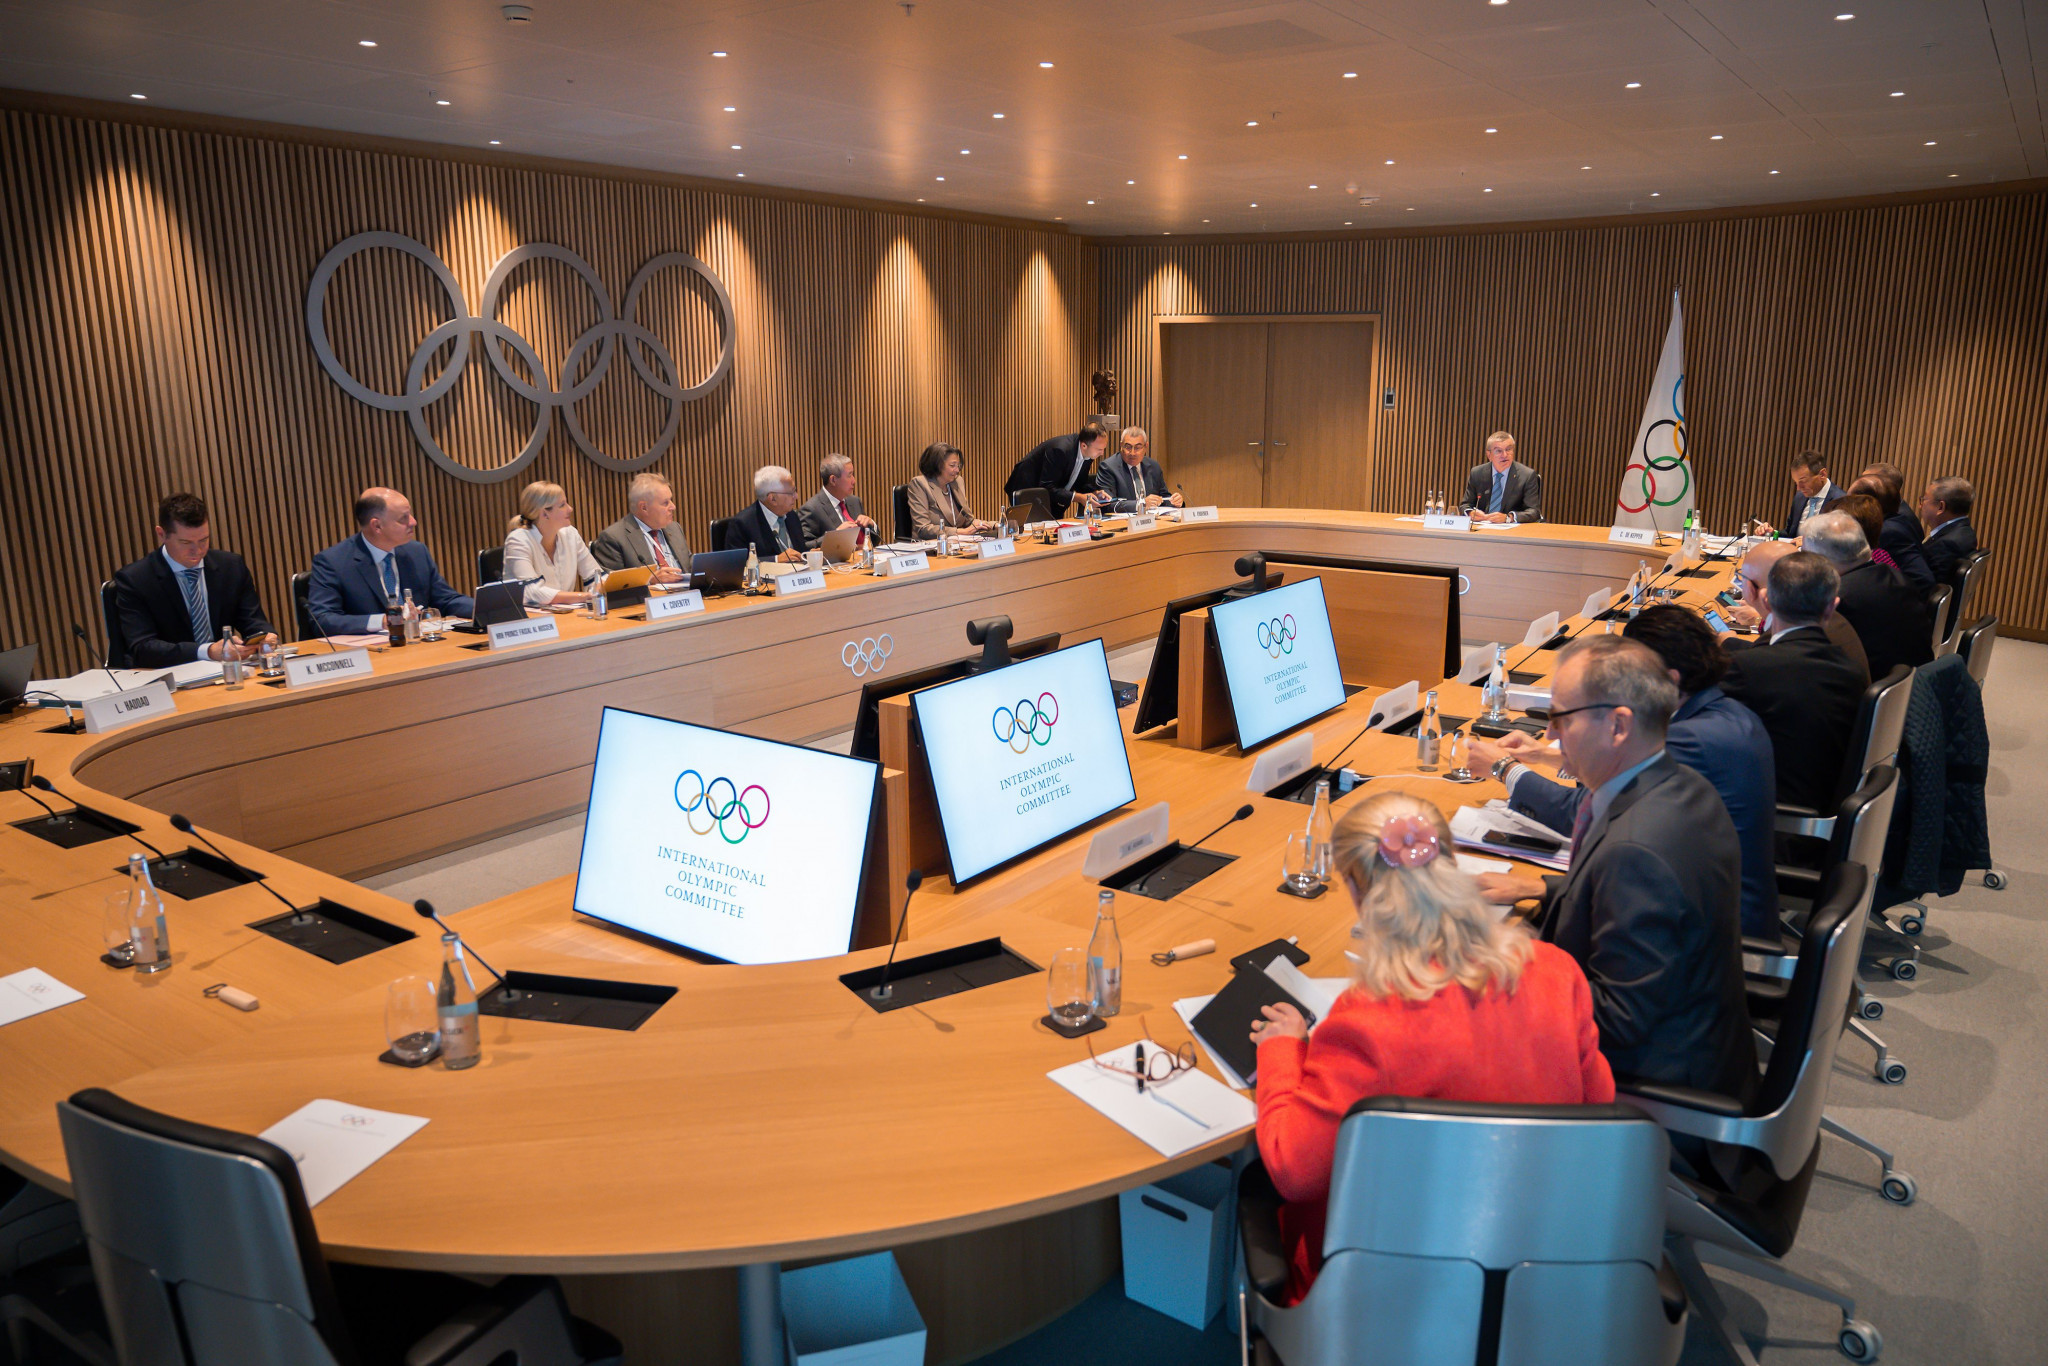 Olympic Summit "strongly condemns" Moscow Laboratory data manipulation but warns will not support total ban of Russia